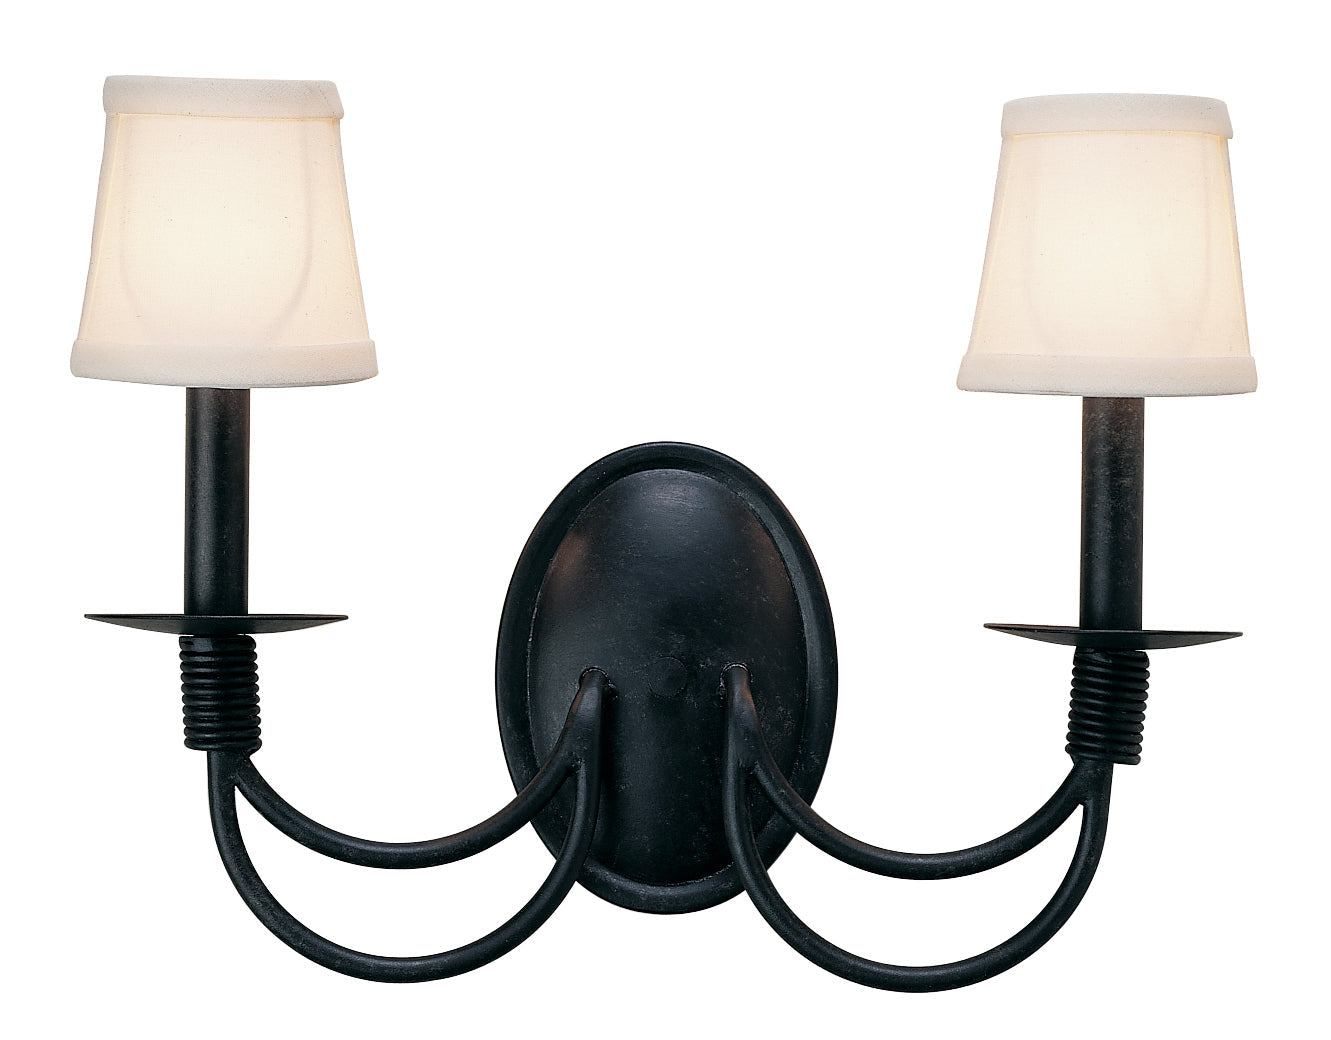 16" Bell 2-Light Wall Sconce by 2nd Ave Lighting